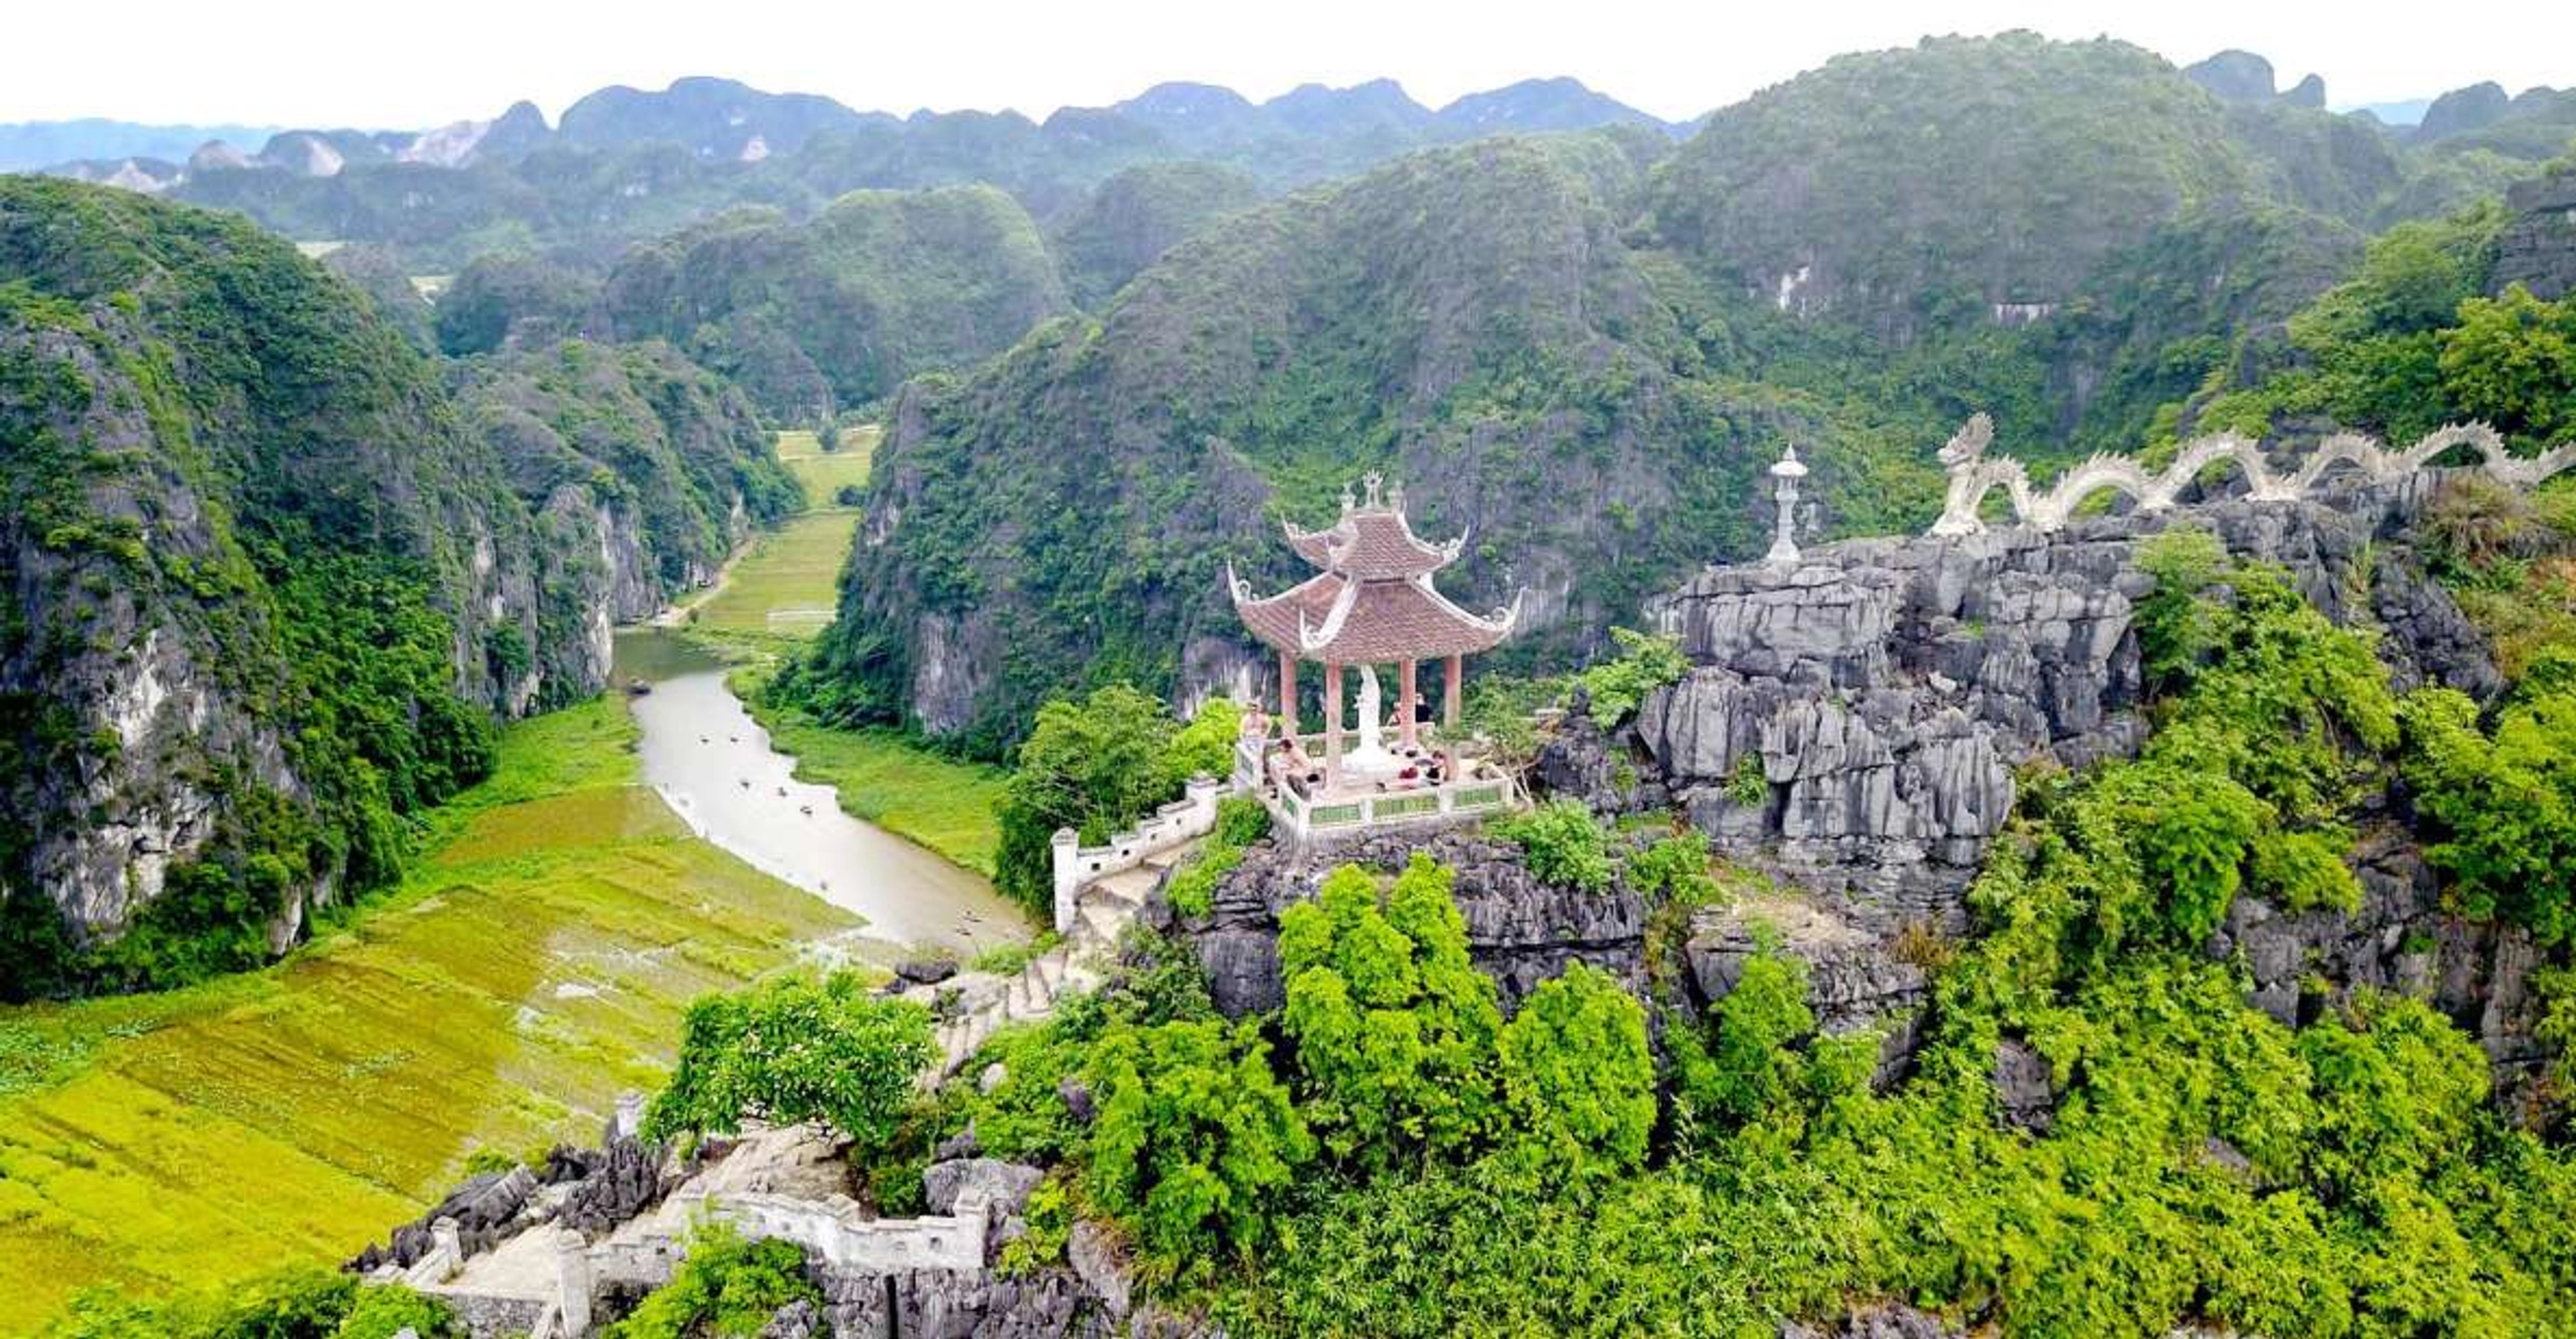 Journey to Explore Ninh Binh Vietnam's Tourism Paradise in the Heart of Majestic Nature